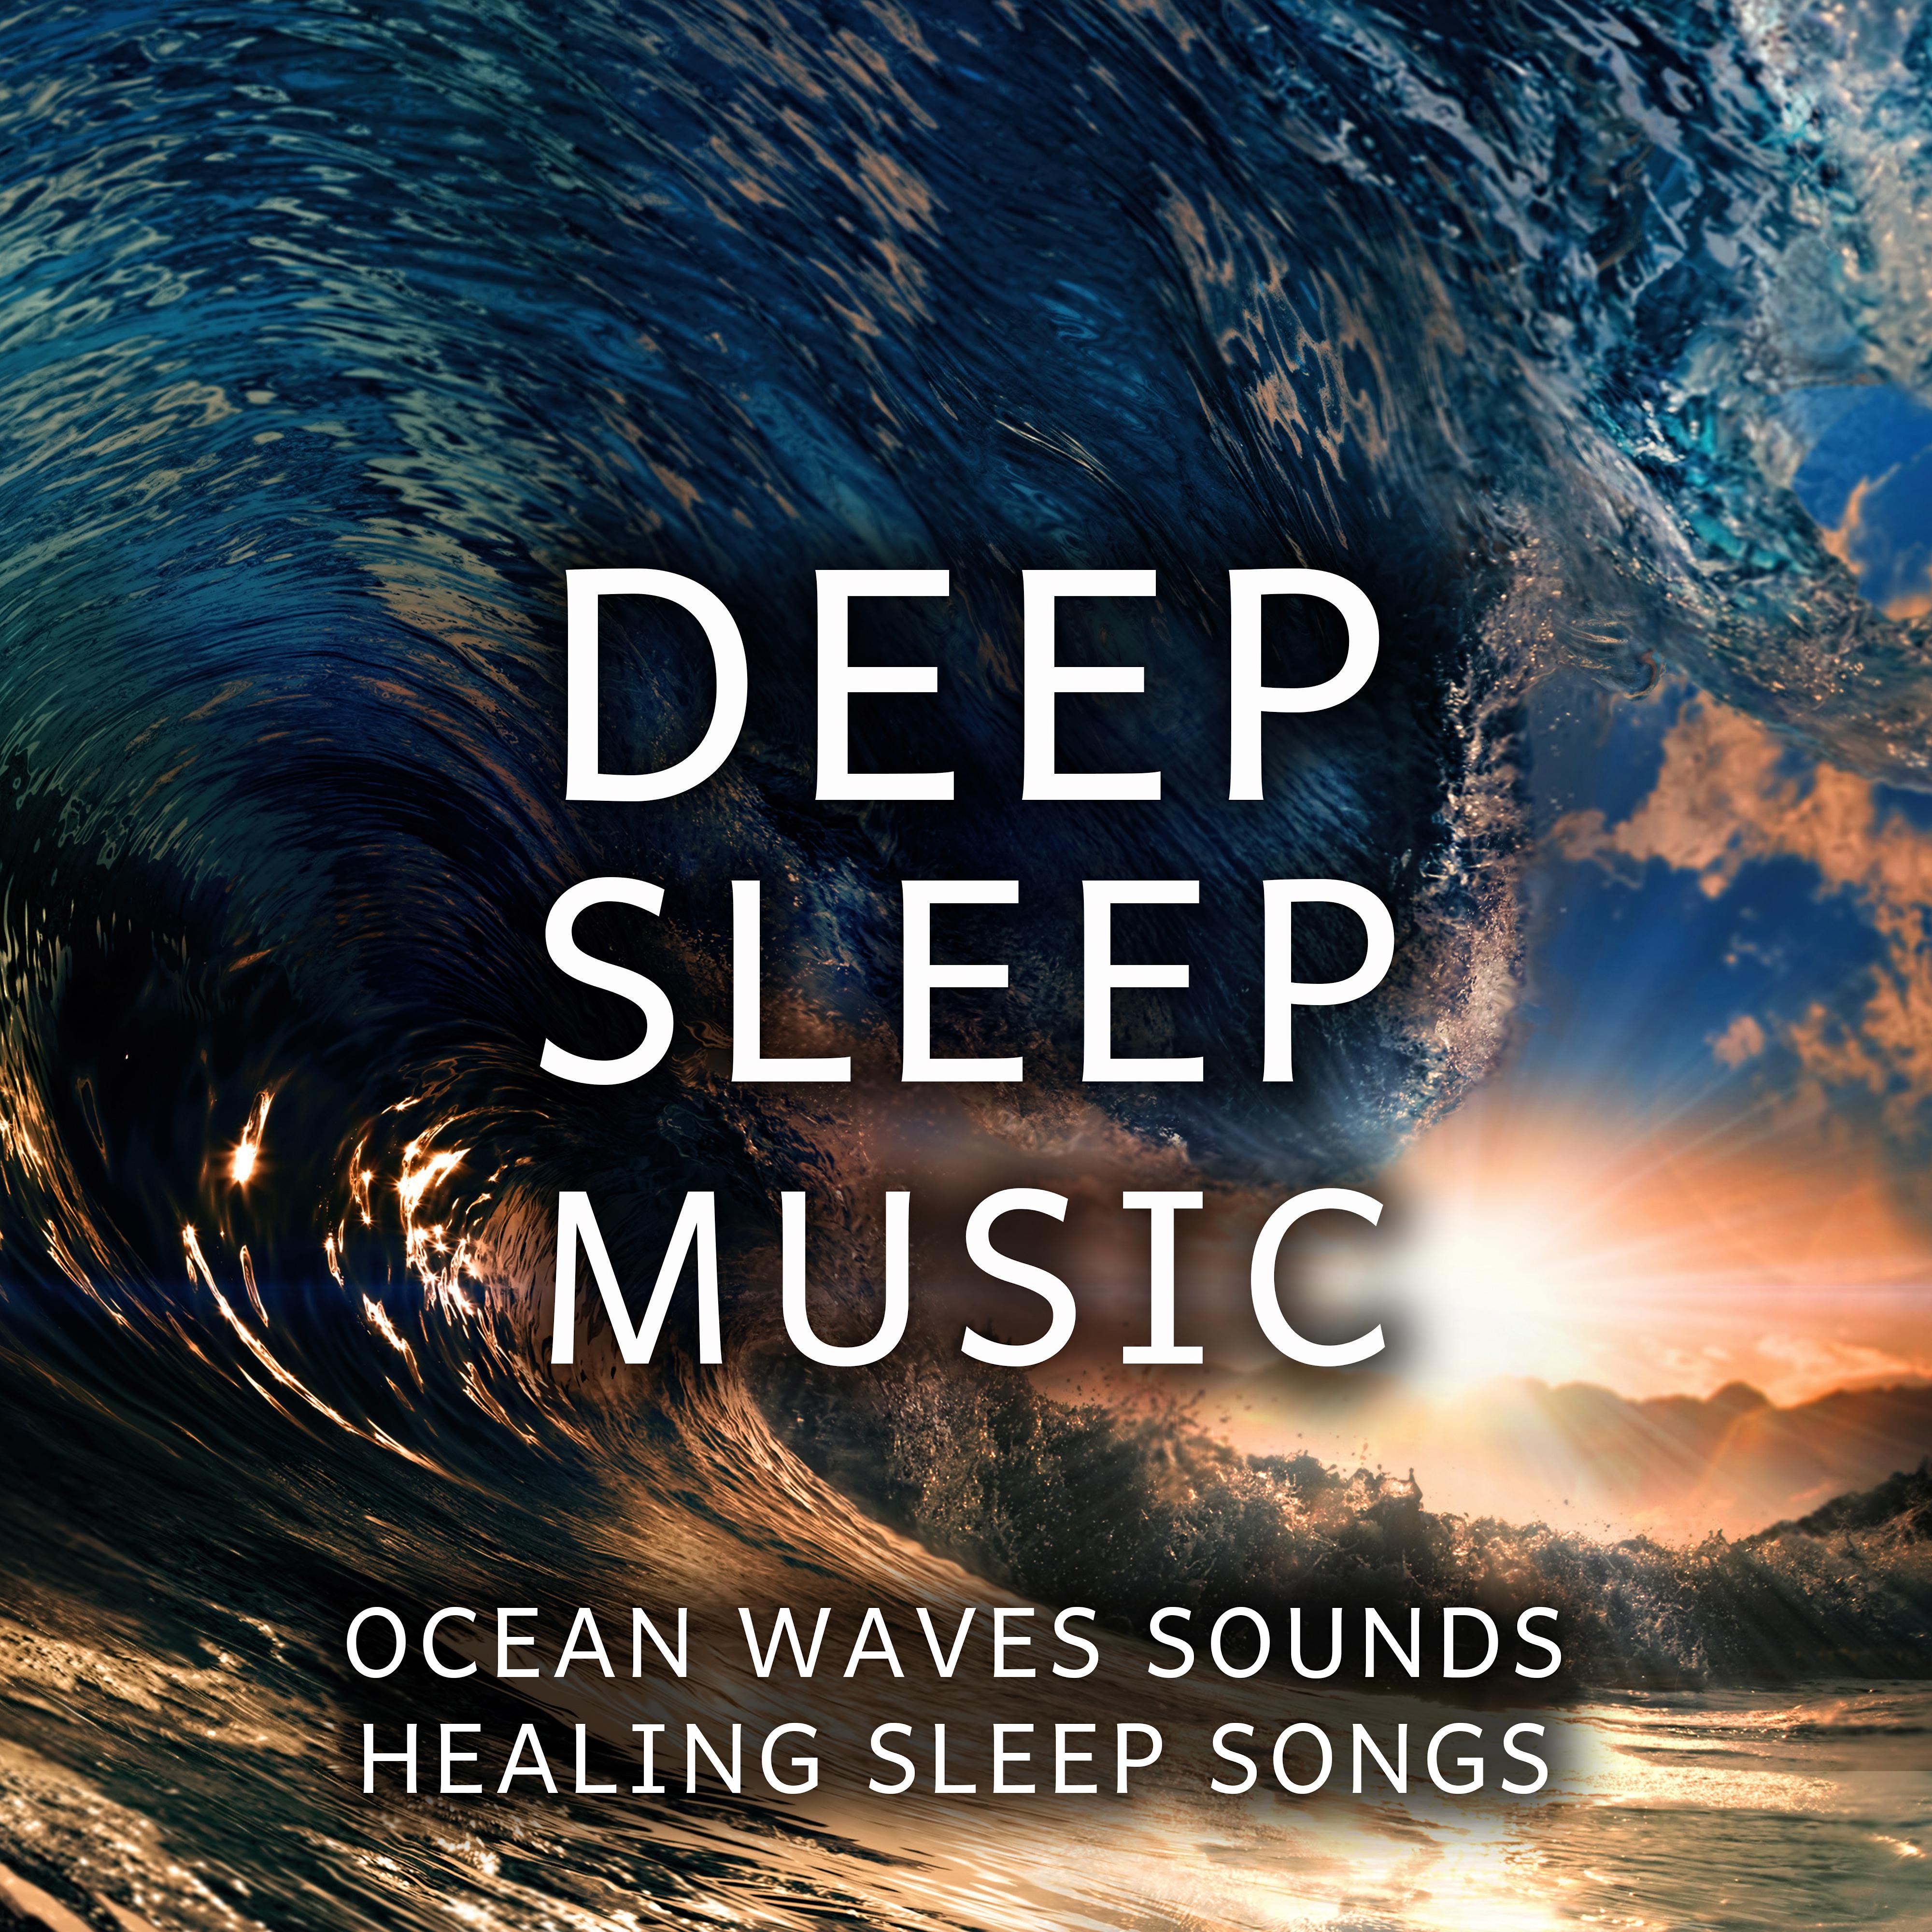 Deep Sleep Music - Soothing and Relaxing Ocean Waves Sounds, Healing Sleep Songs, New Age Nature Music Sounds